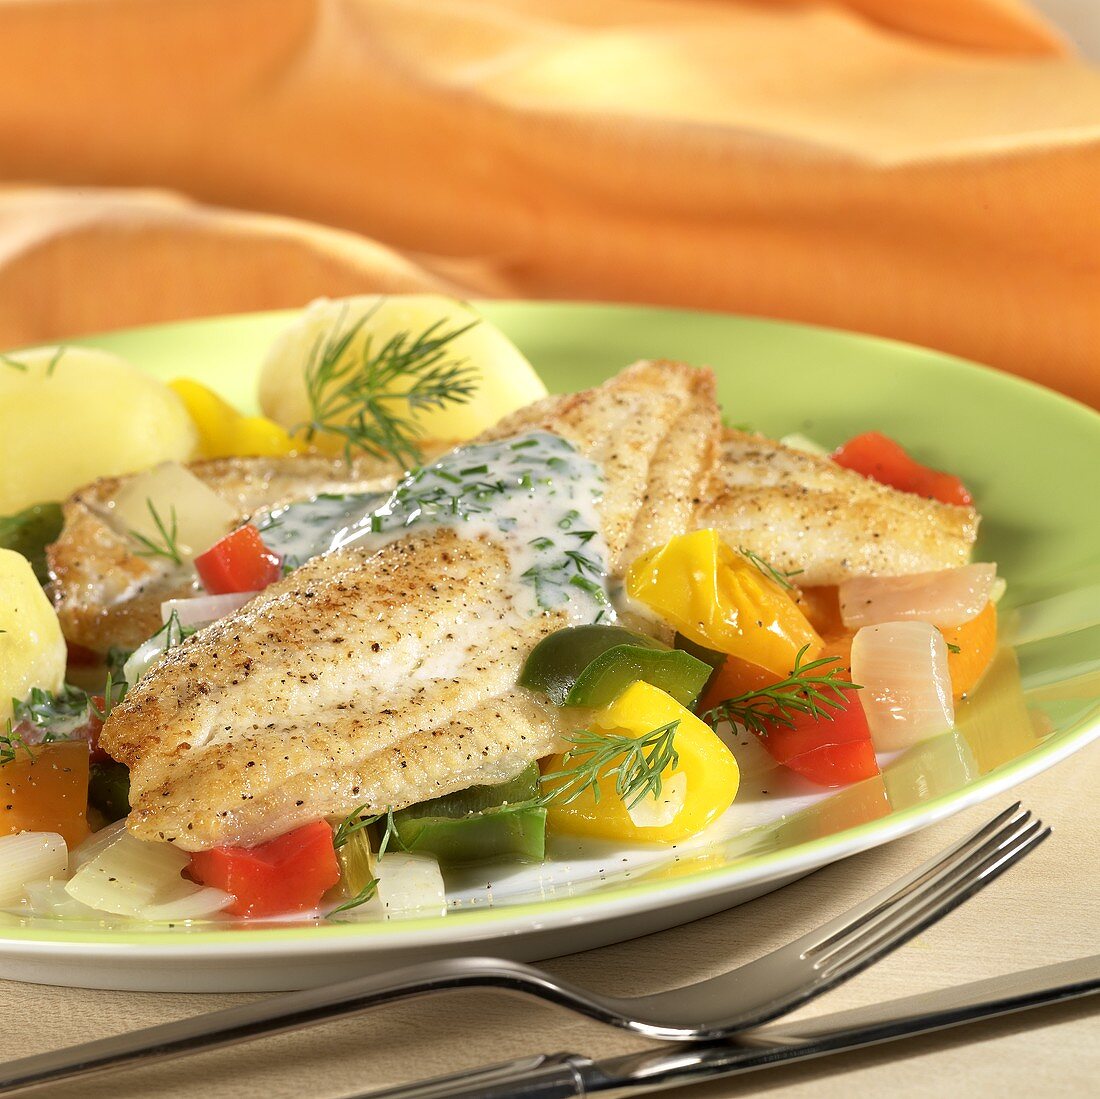 Plaice fillets with herb sauce on peppers